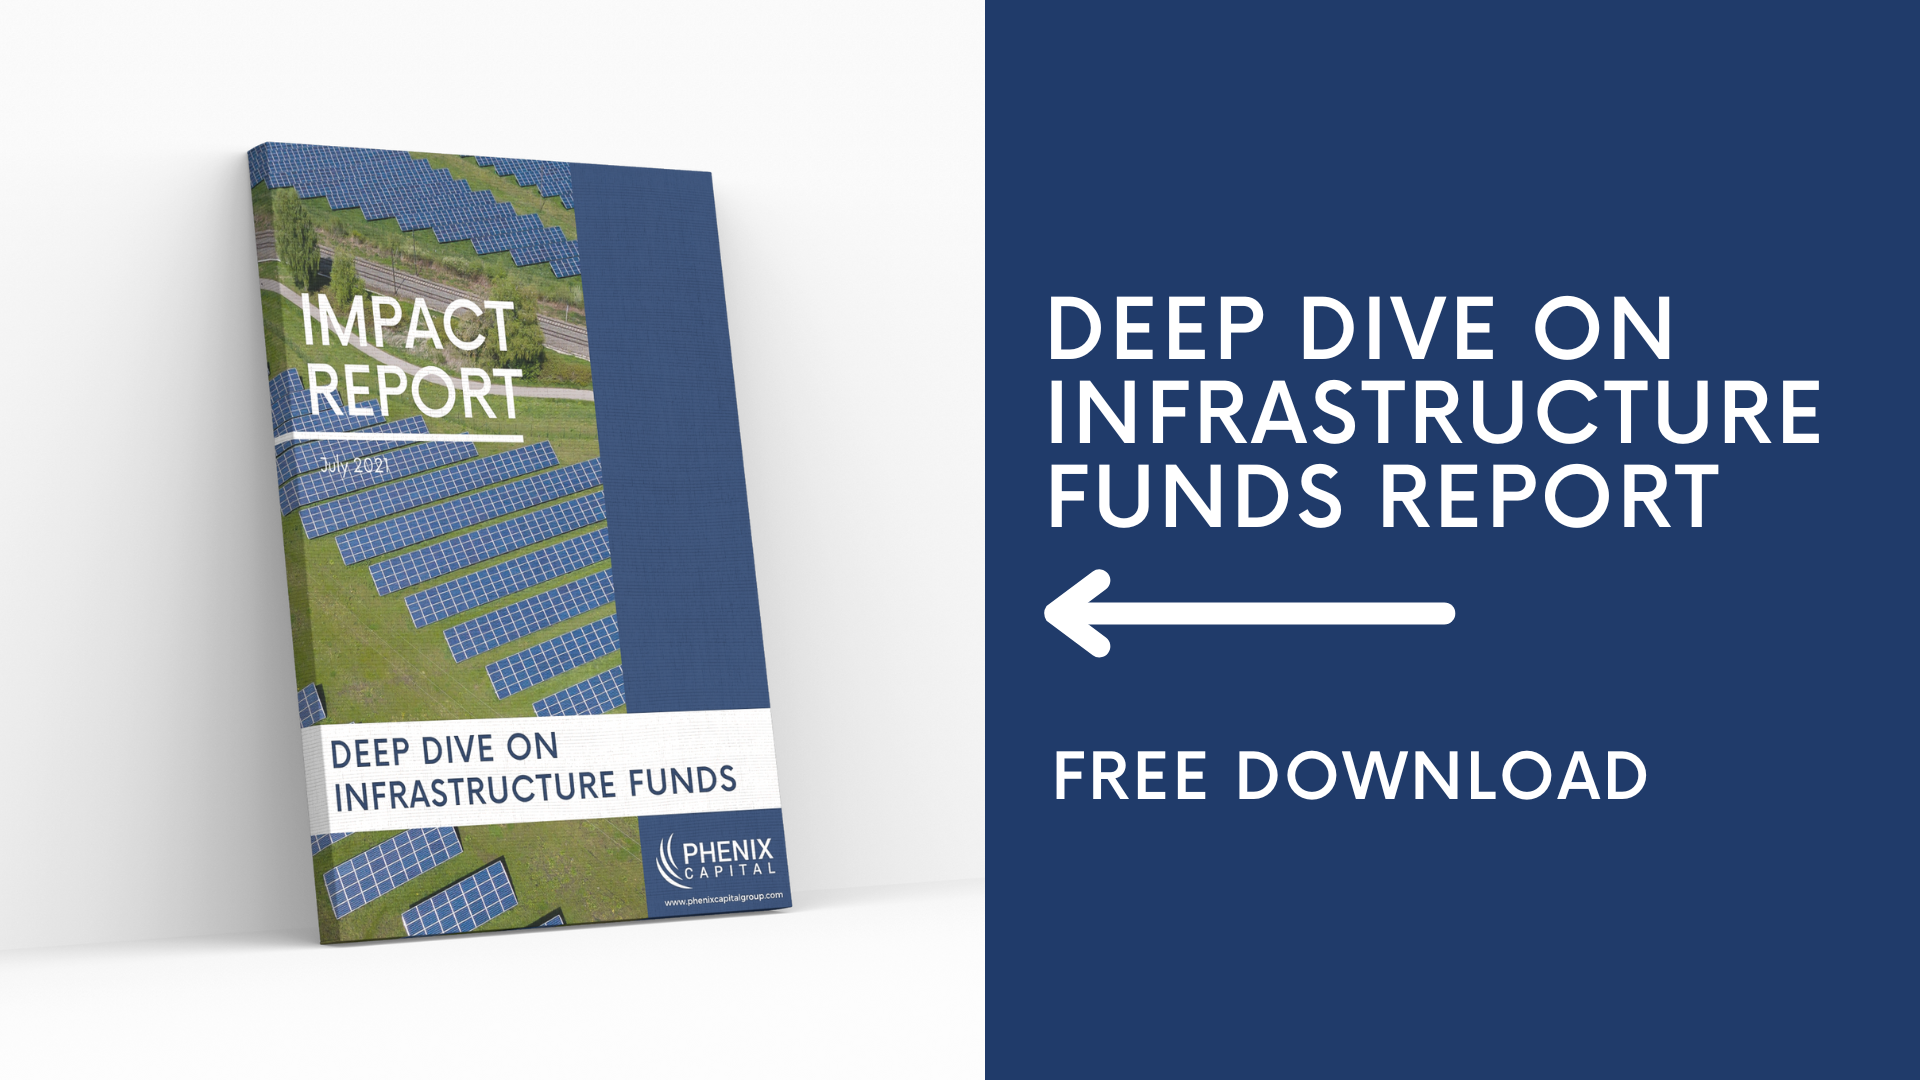 PRESS RELEASE: Impact Report: Deep Dive on Infrastructure Funds